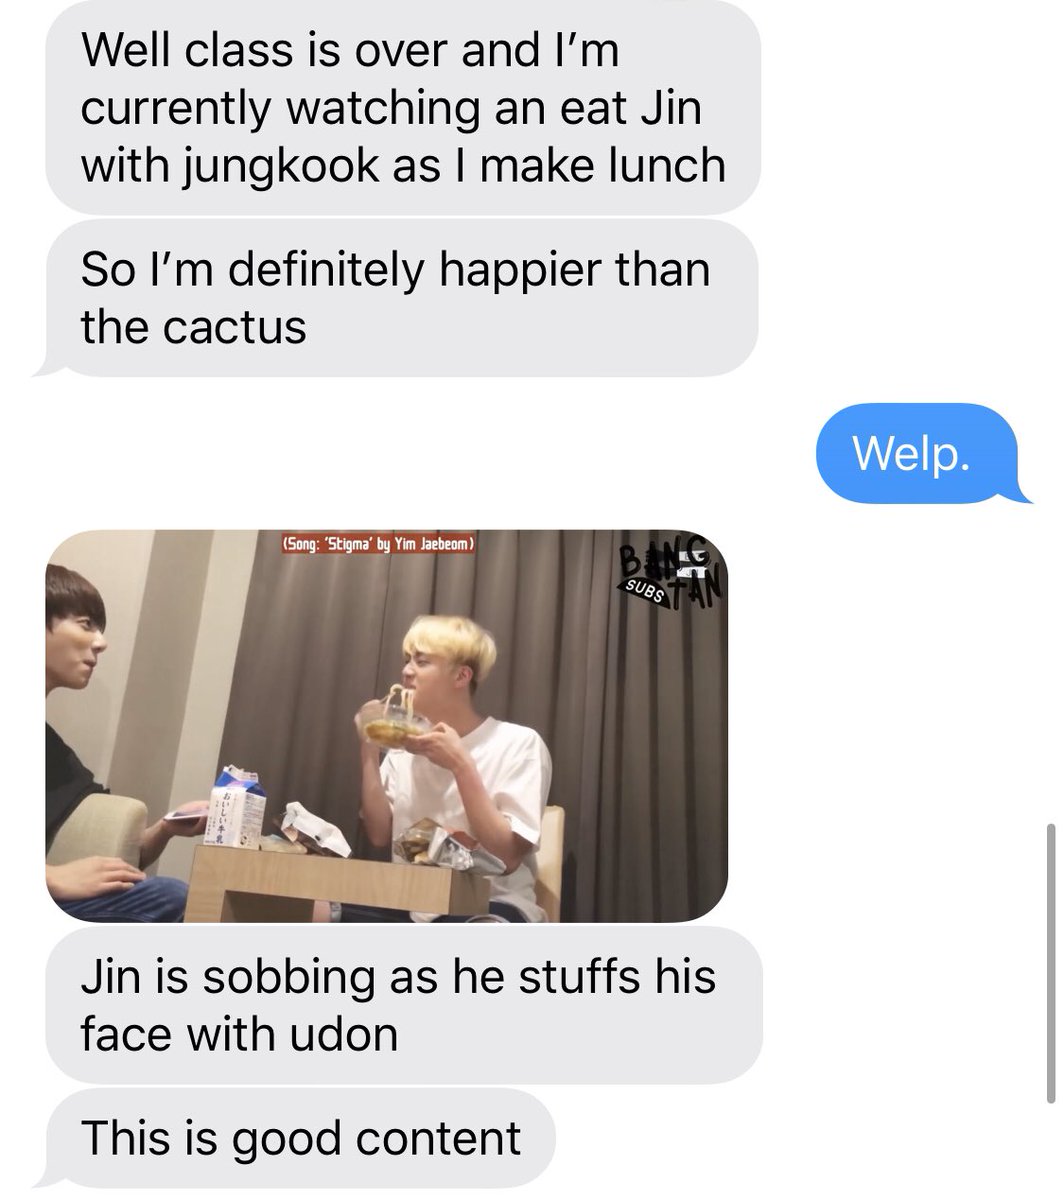 John watched an eat Jin ep while making lunch and finished pt 3 of the classroom run bts episodes. Wow John’s really is in this bangtan shit for life. Also he’s team mint chocolate. (The cactus is a reply to one of my plants at work, which is doing JUST fine...probs.)